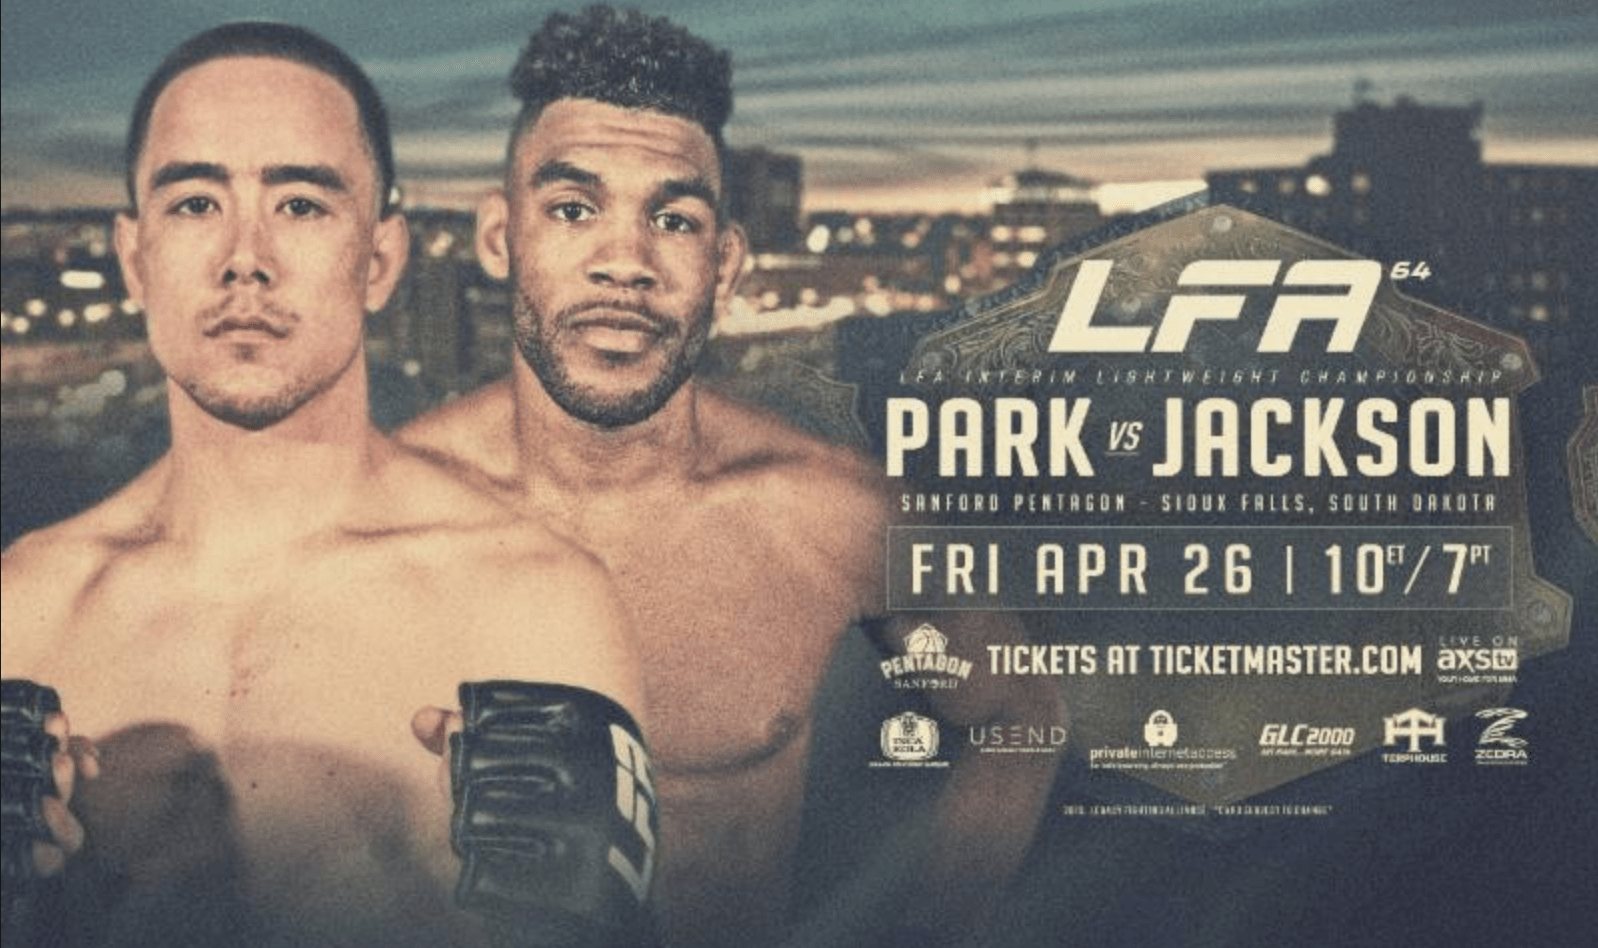 Legacy Fighting Alliance 64 Results